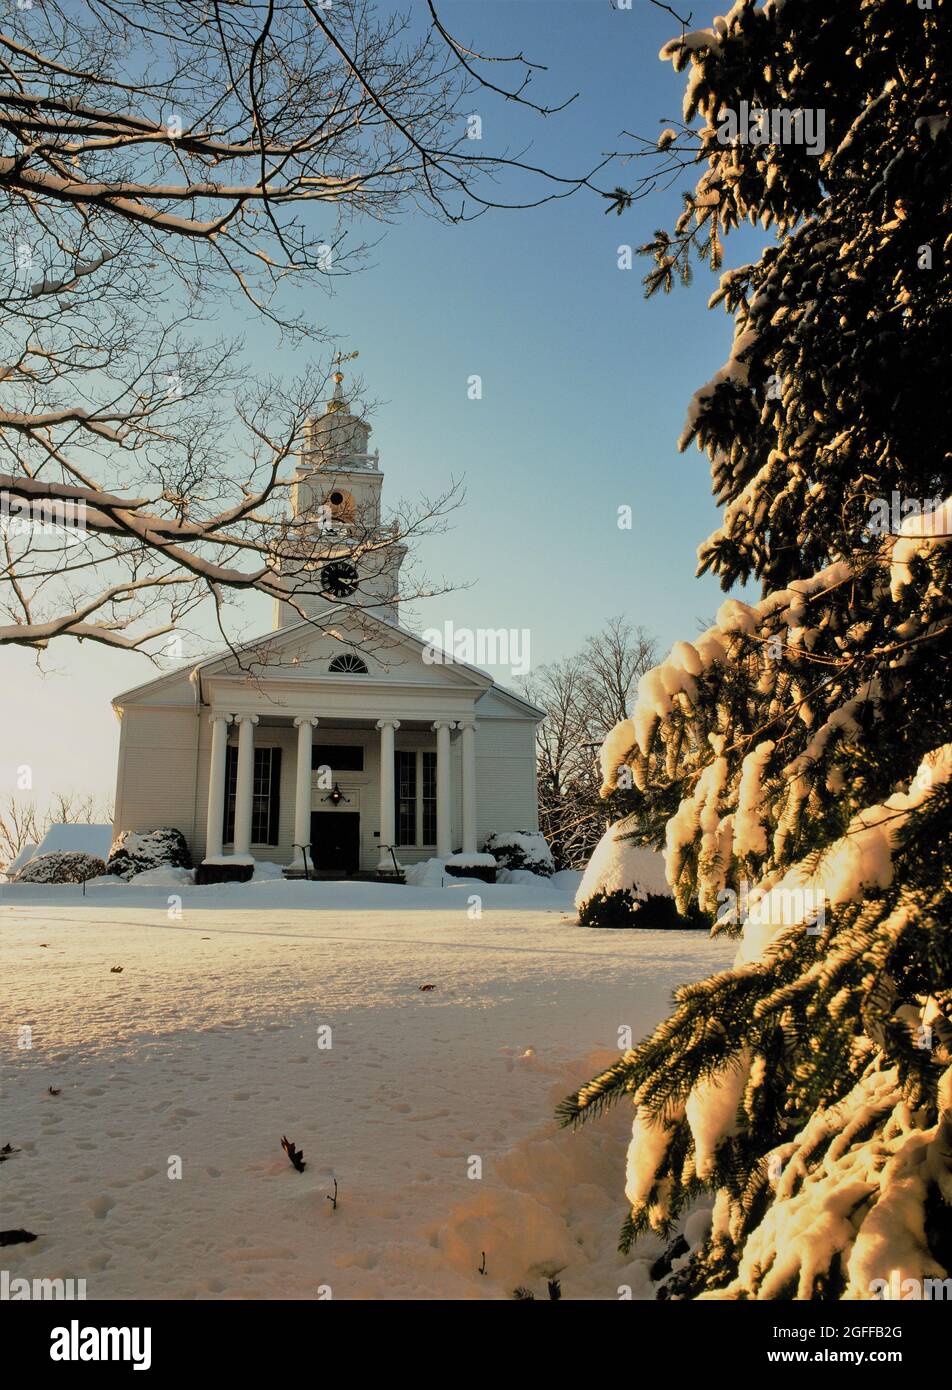 New England church in winter snow Stock Photo